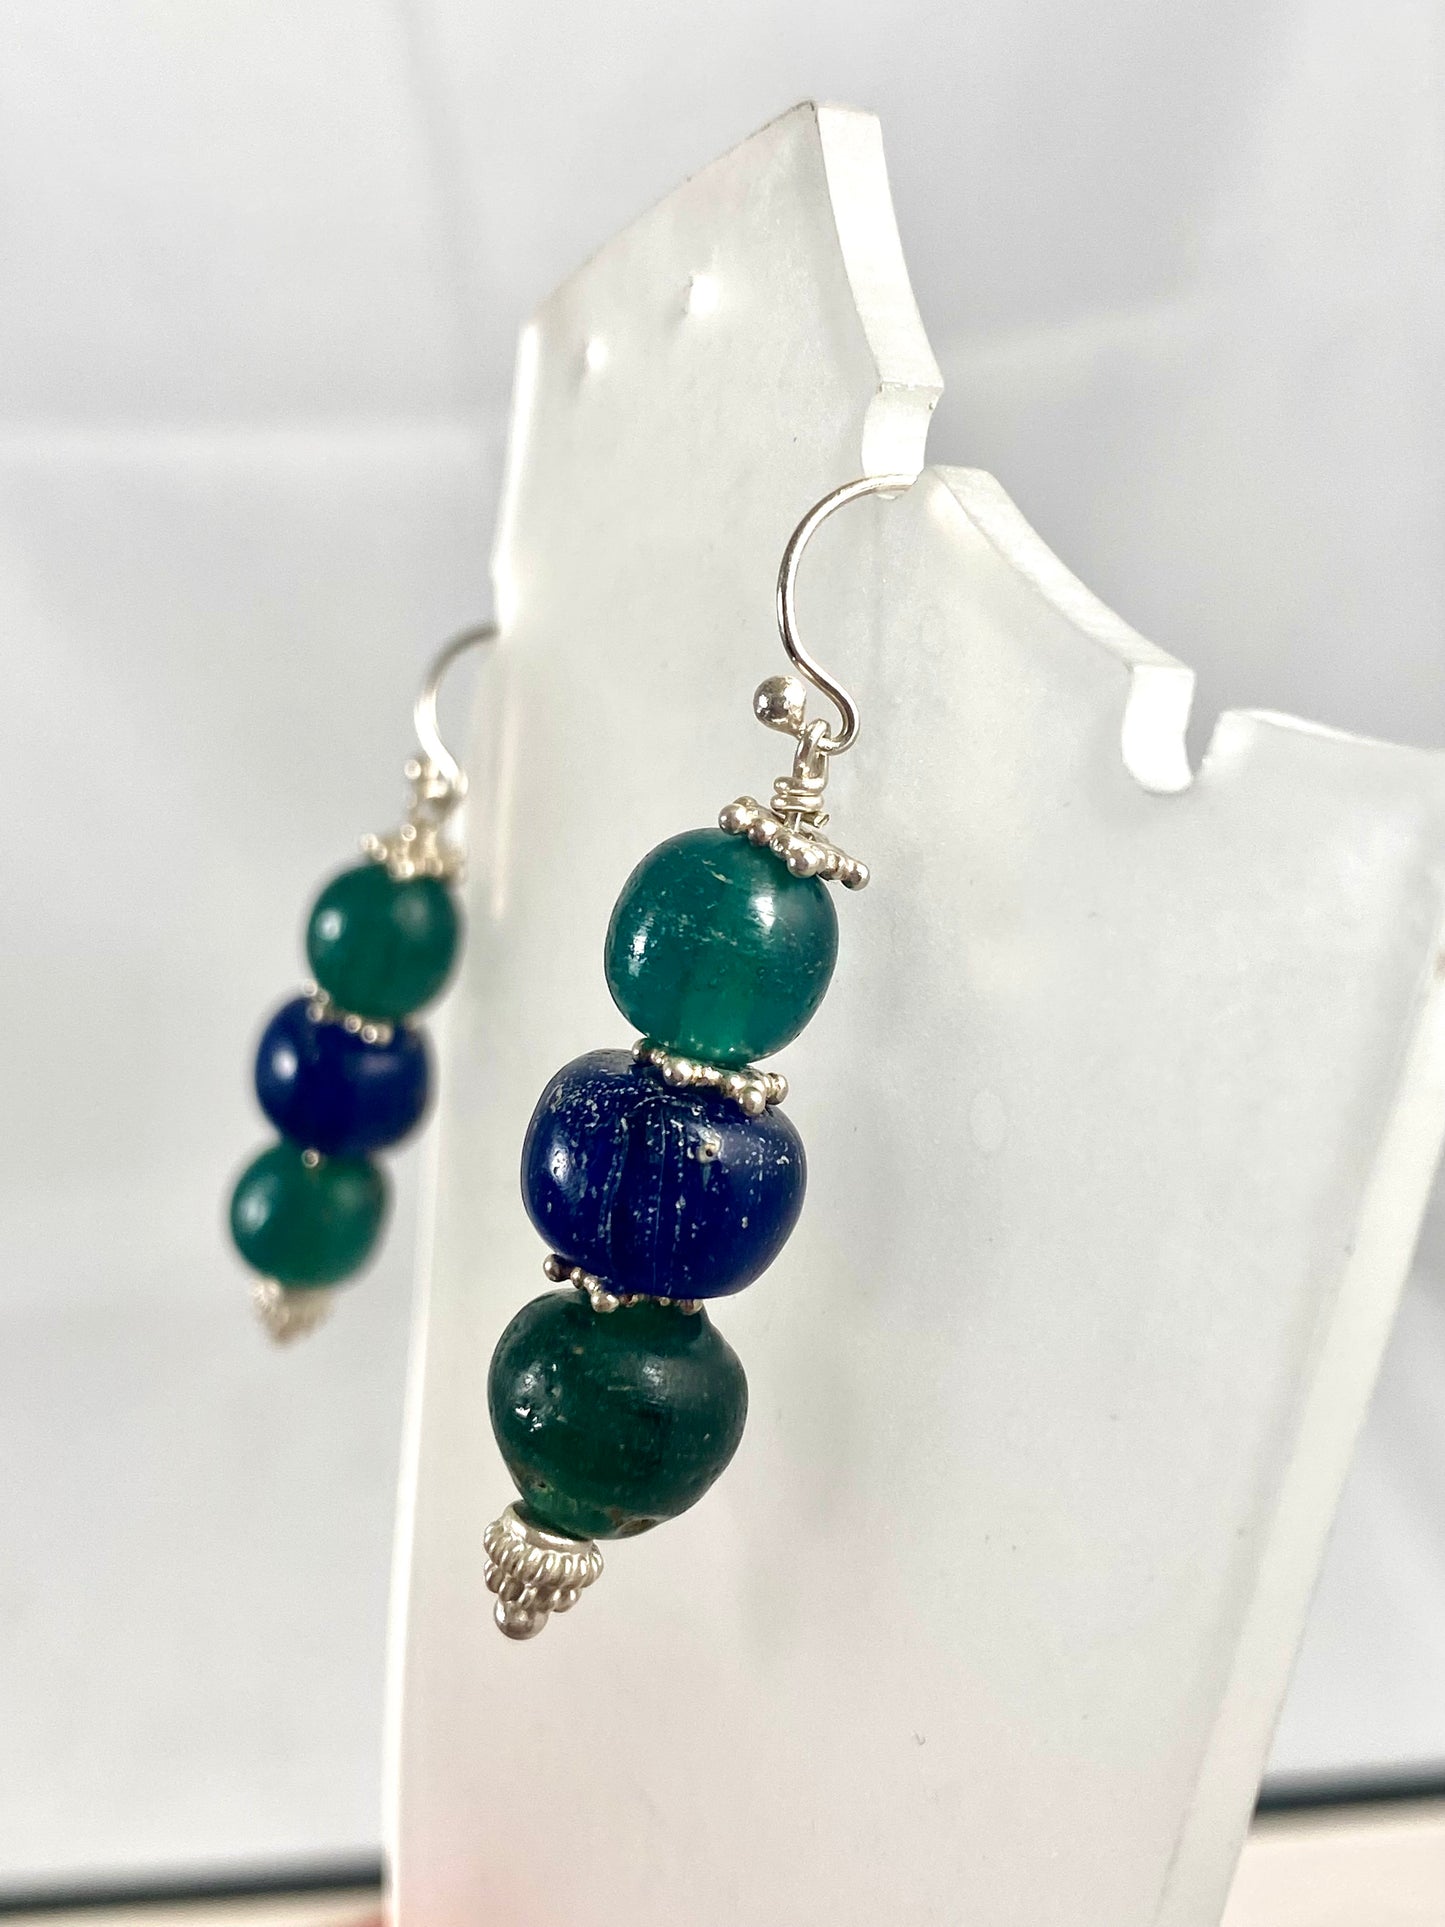 Ancient Javanese Trade Beads-Blue and Green Indo-Pacific Glass Bead Earrings w Sterling Silver